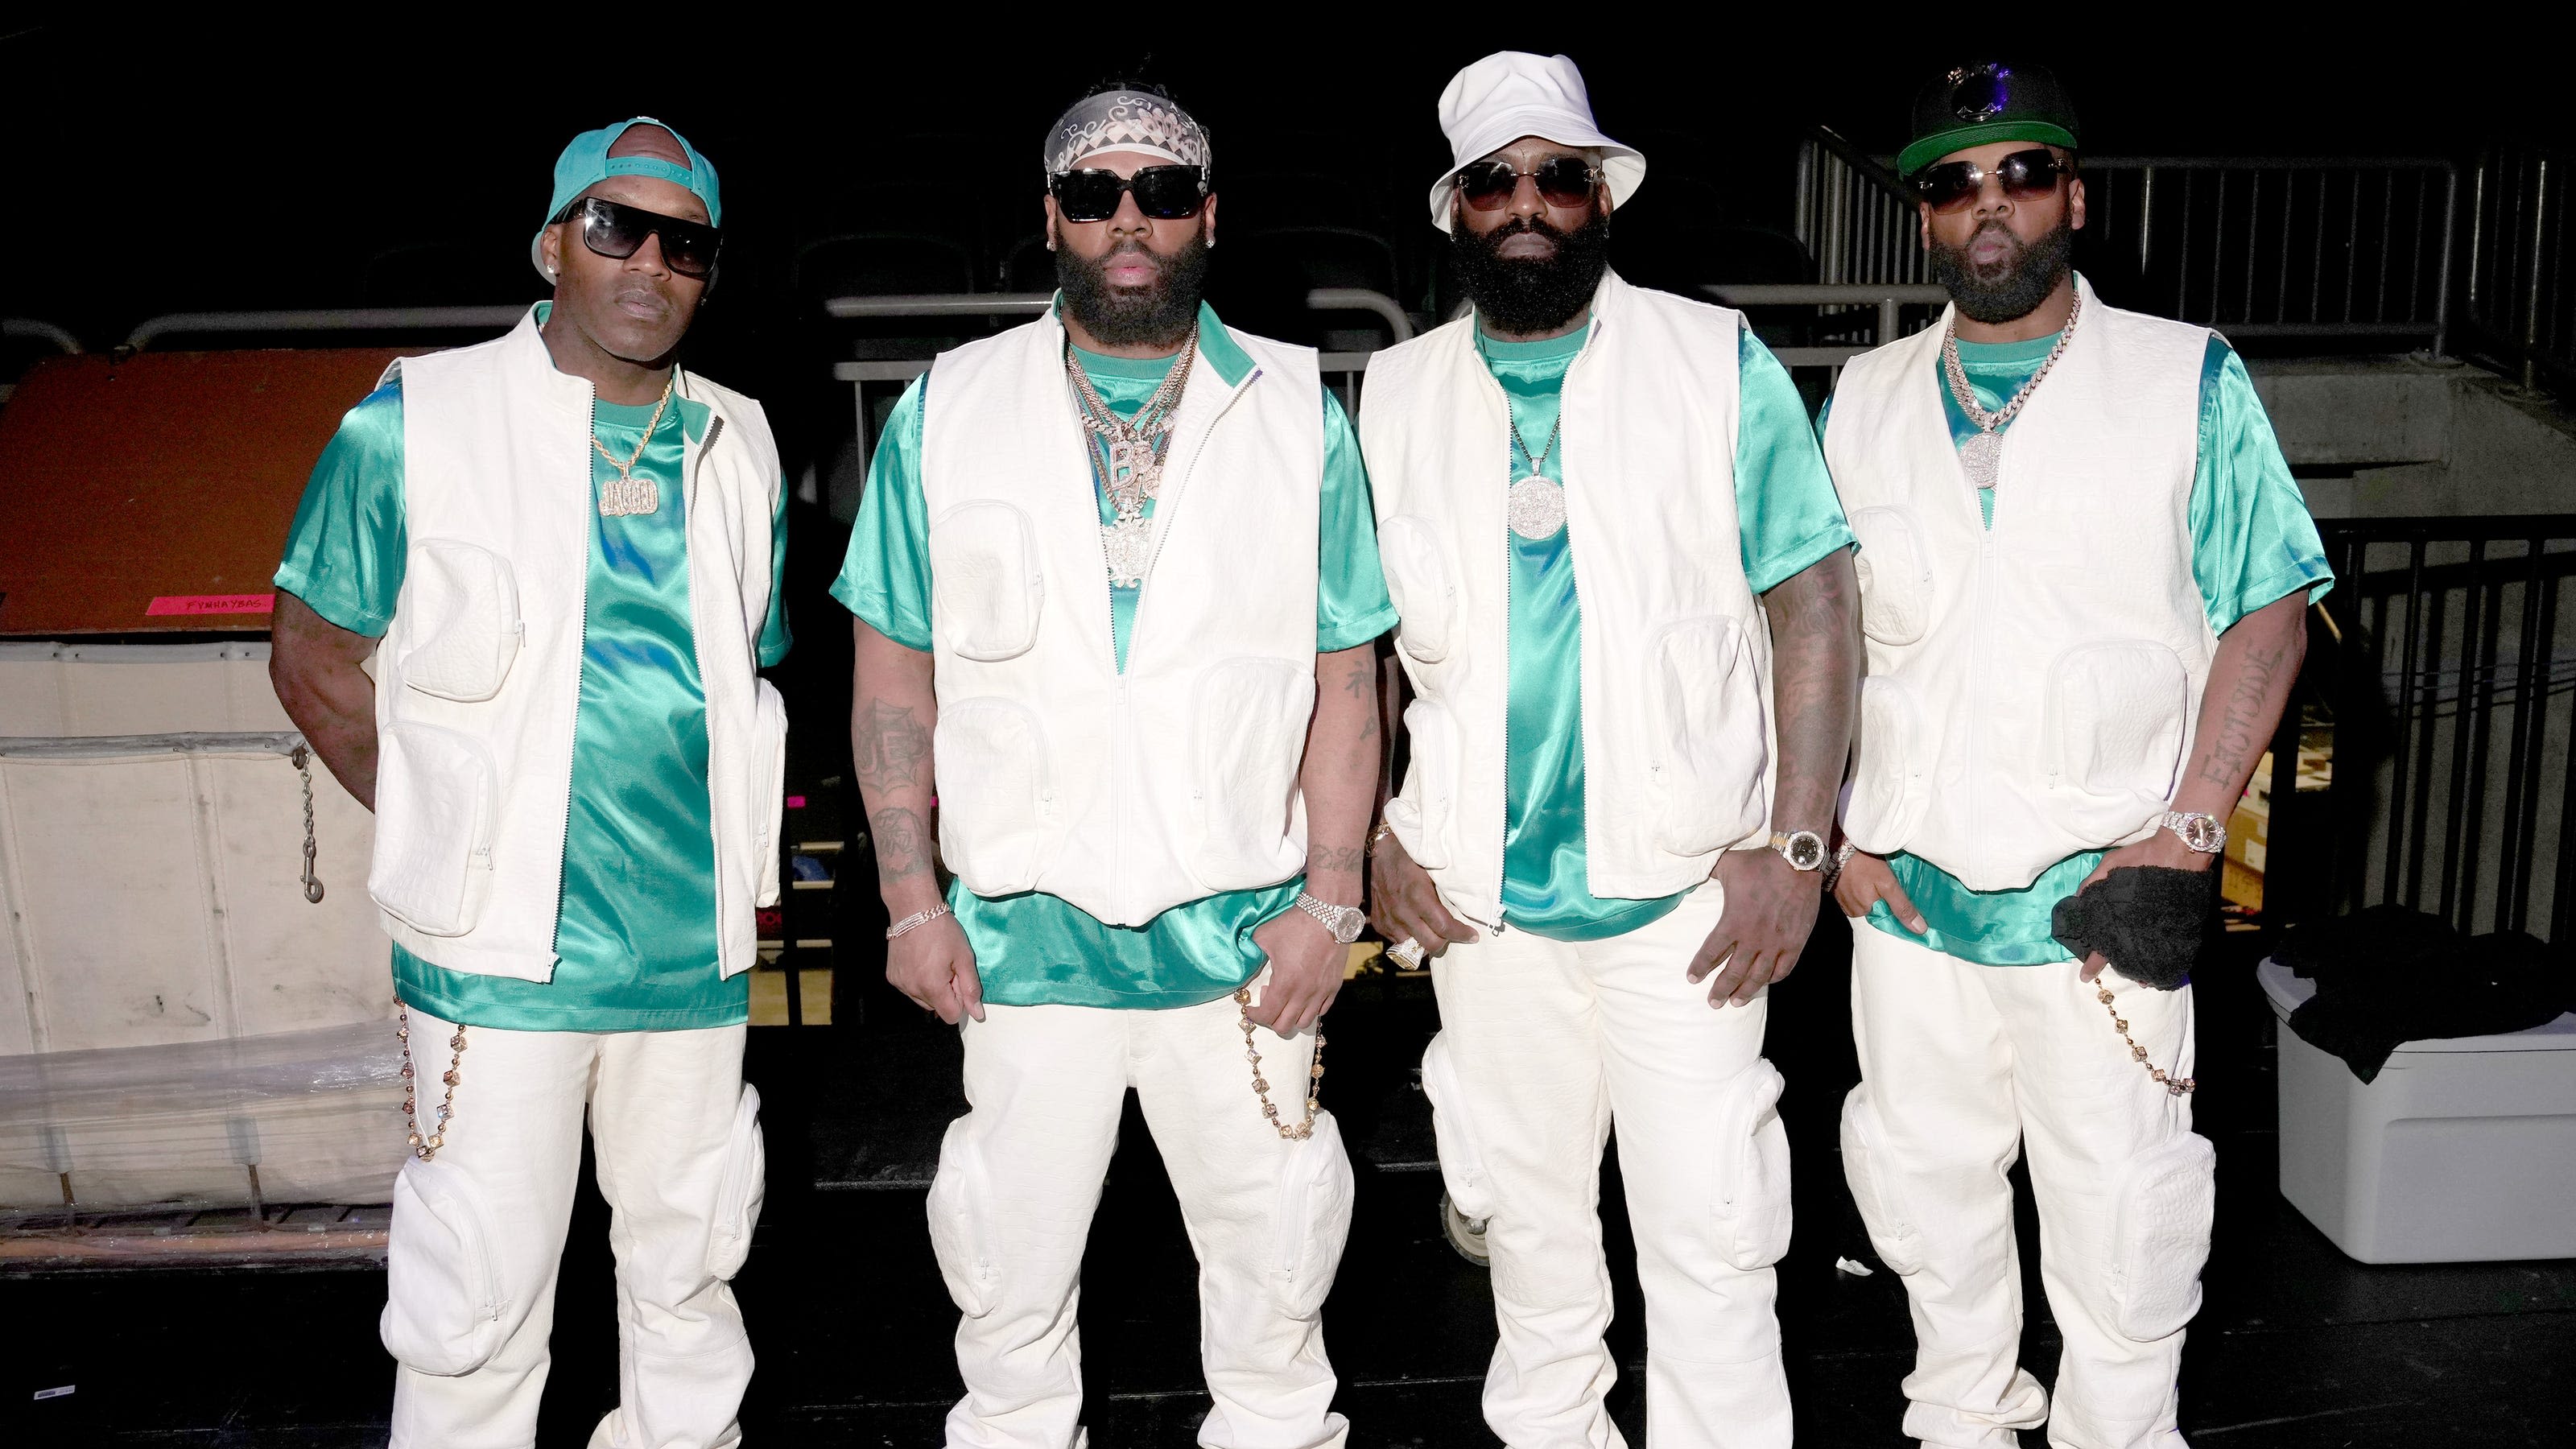 Jagged Edge singer Brandon Casey reveals severe injuries from car accident